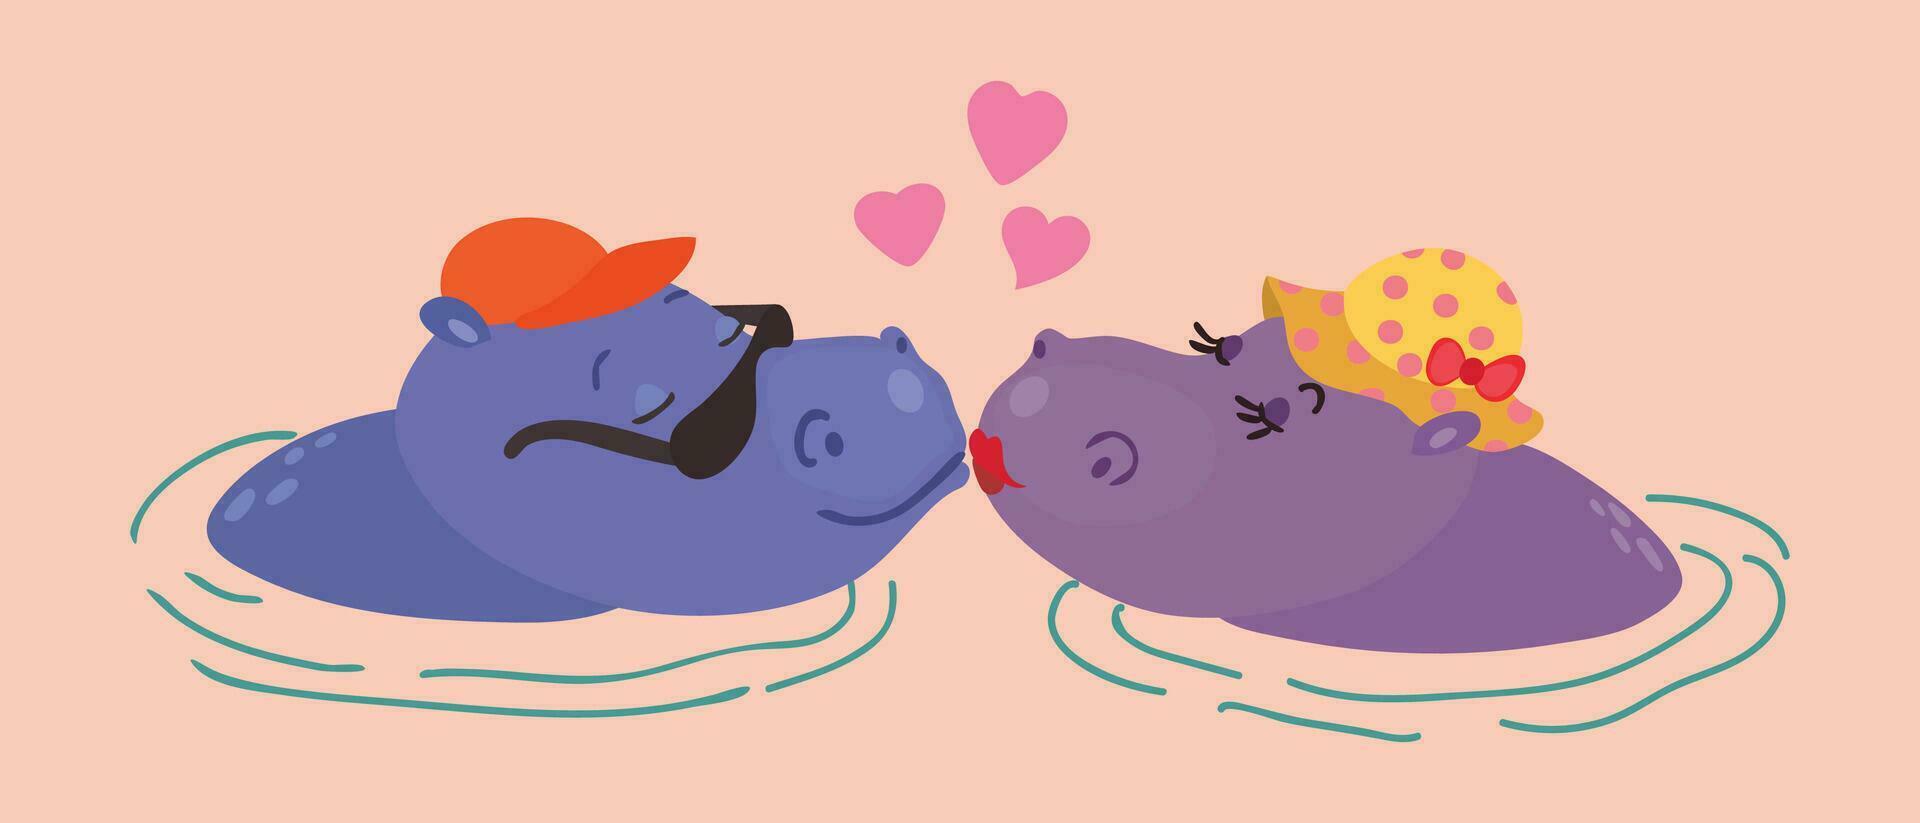 St valentine's day card with  cartoon hippos in love vector illustration